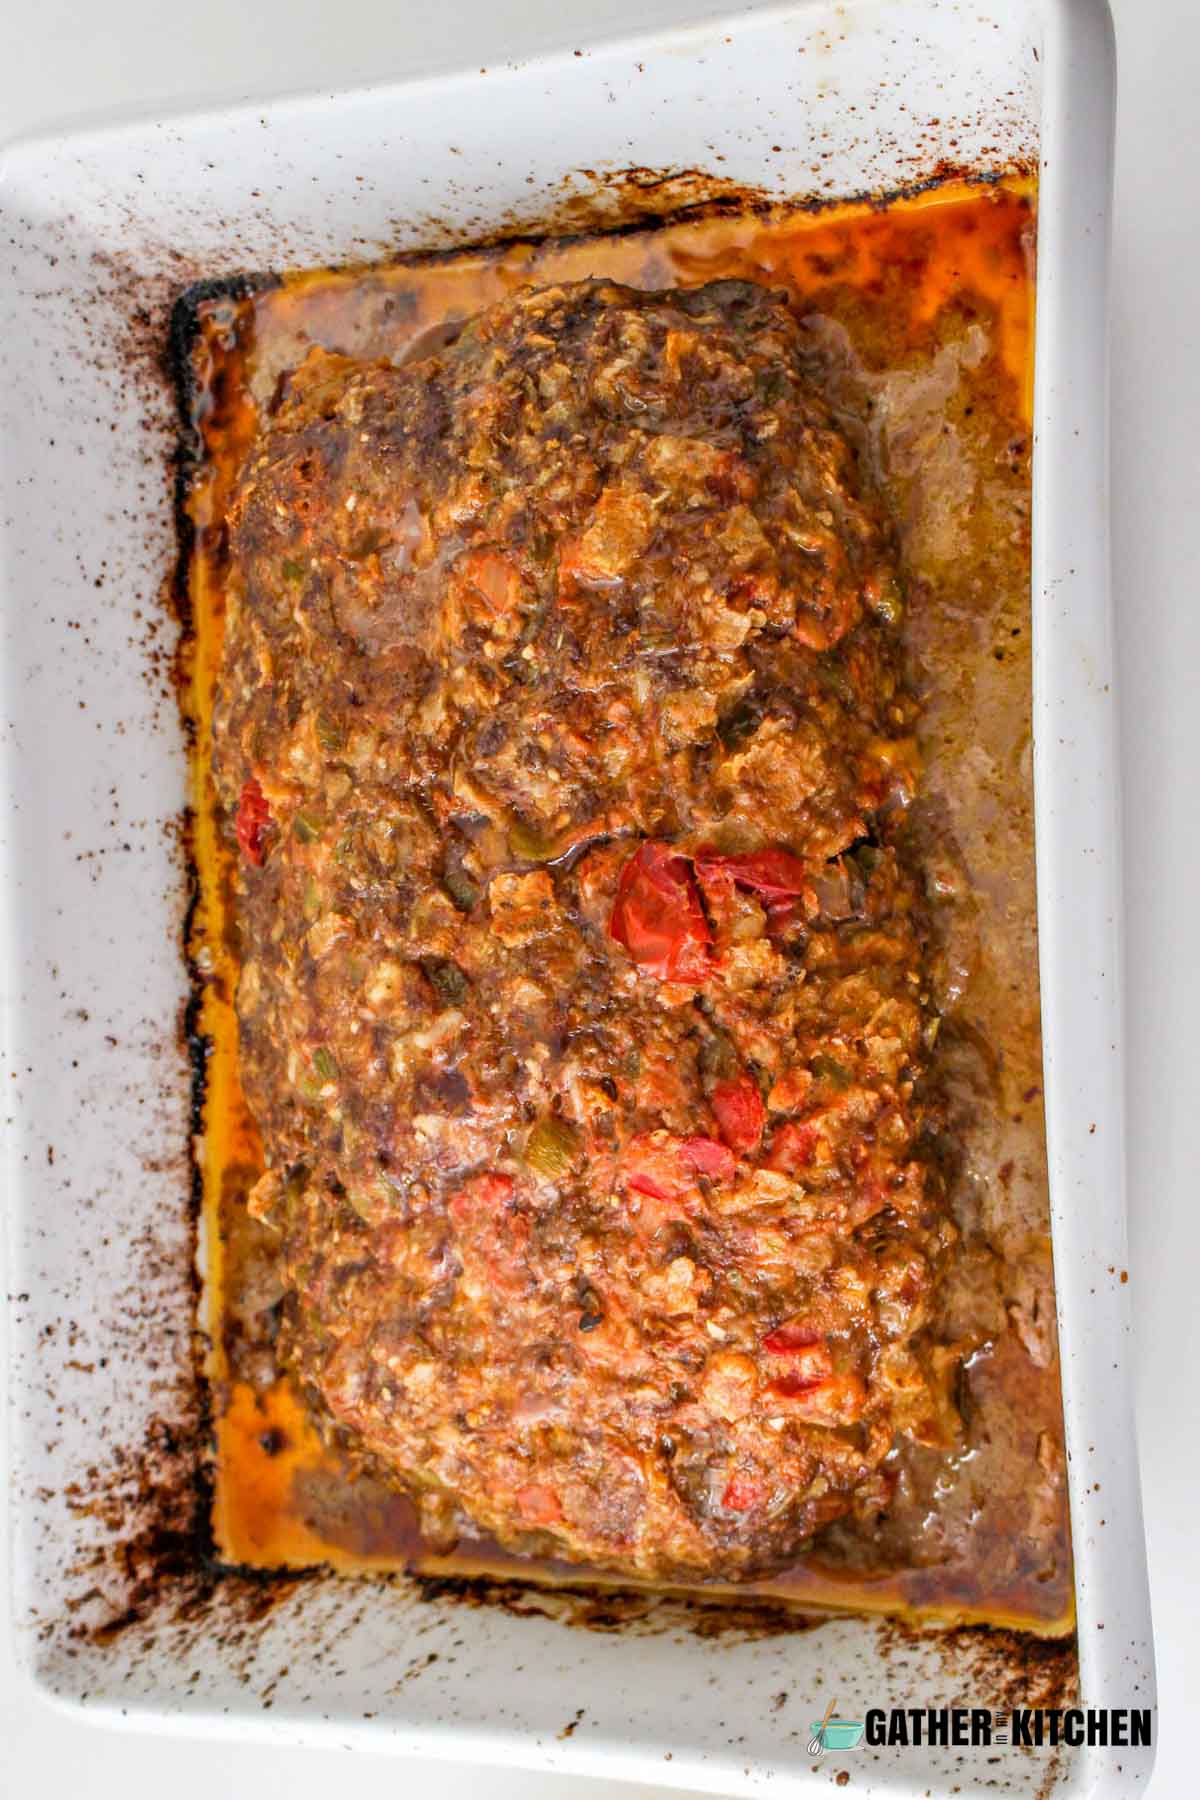 Cooked meatloaf in dish.